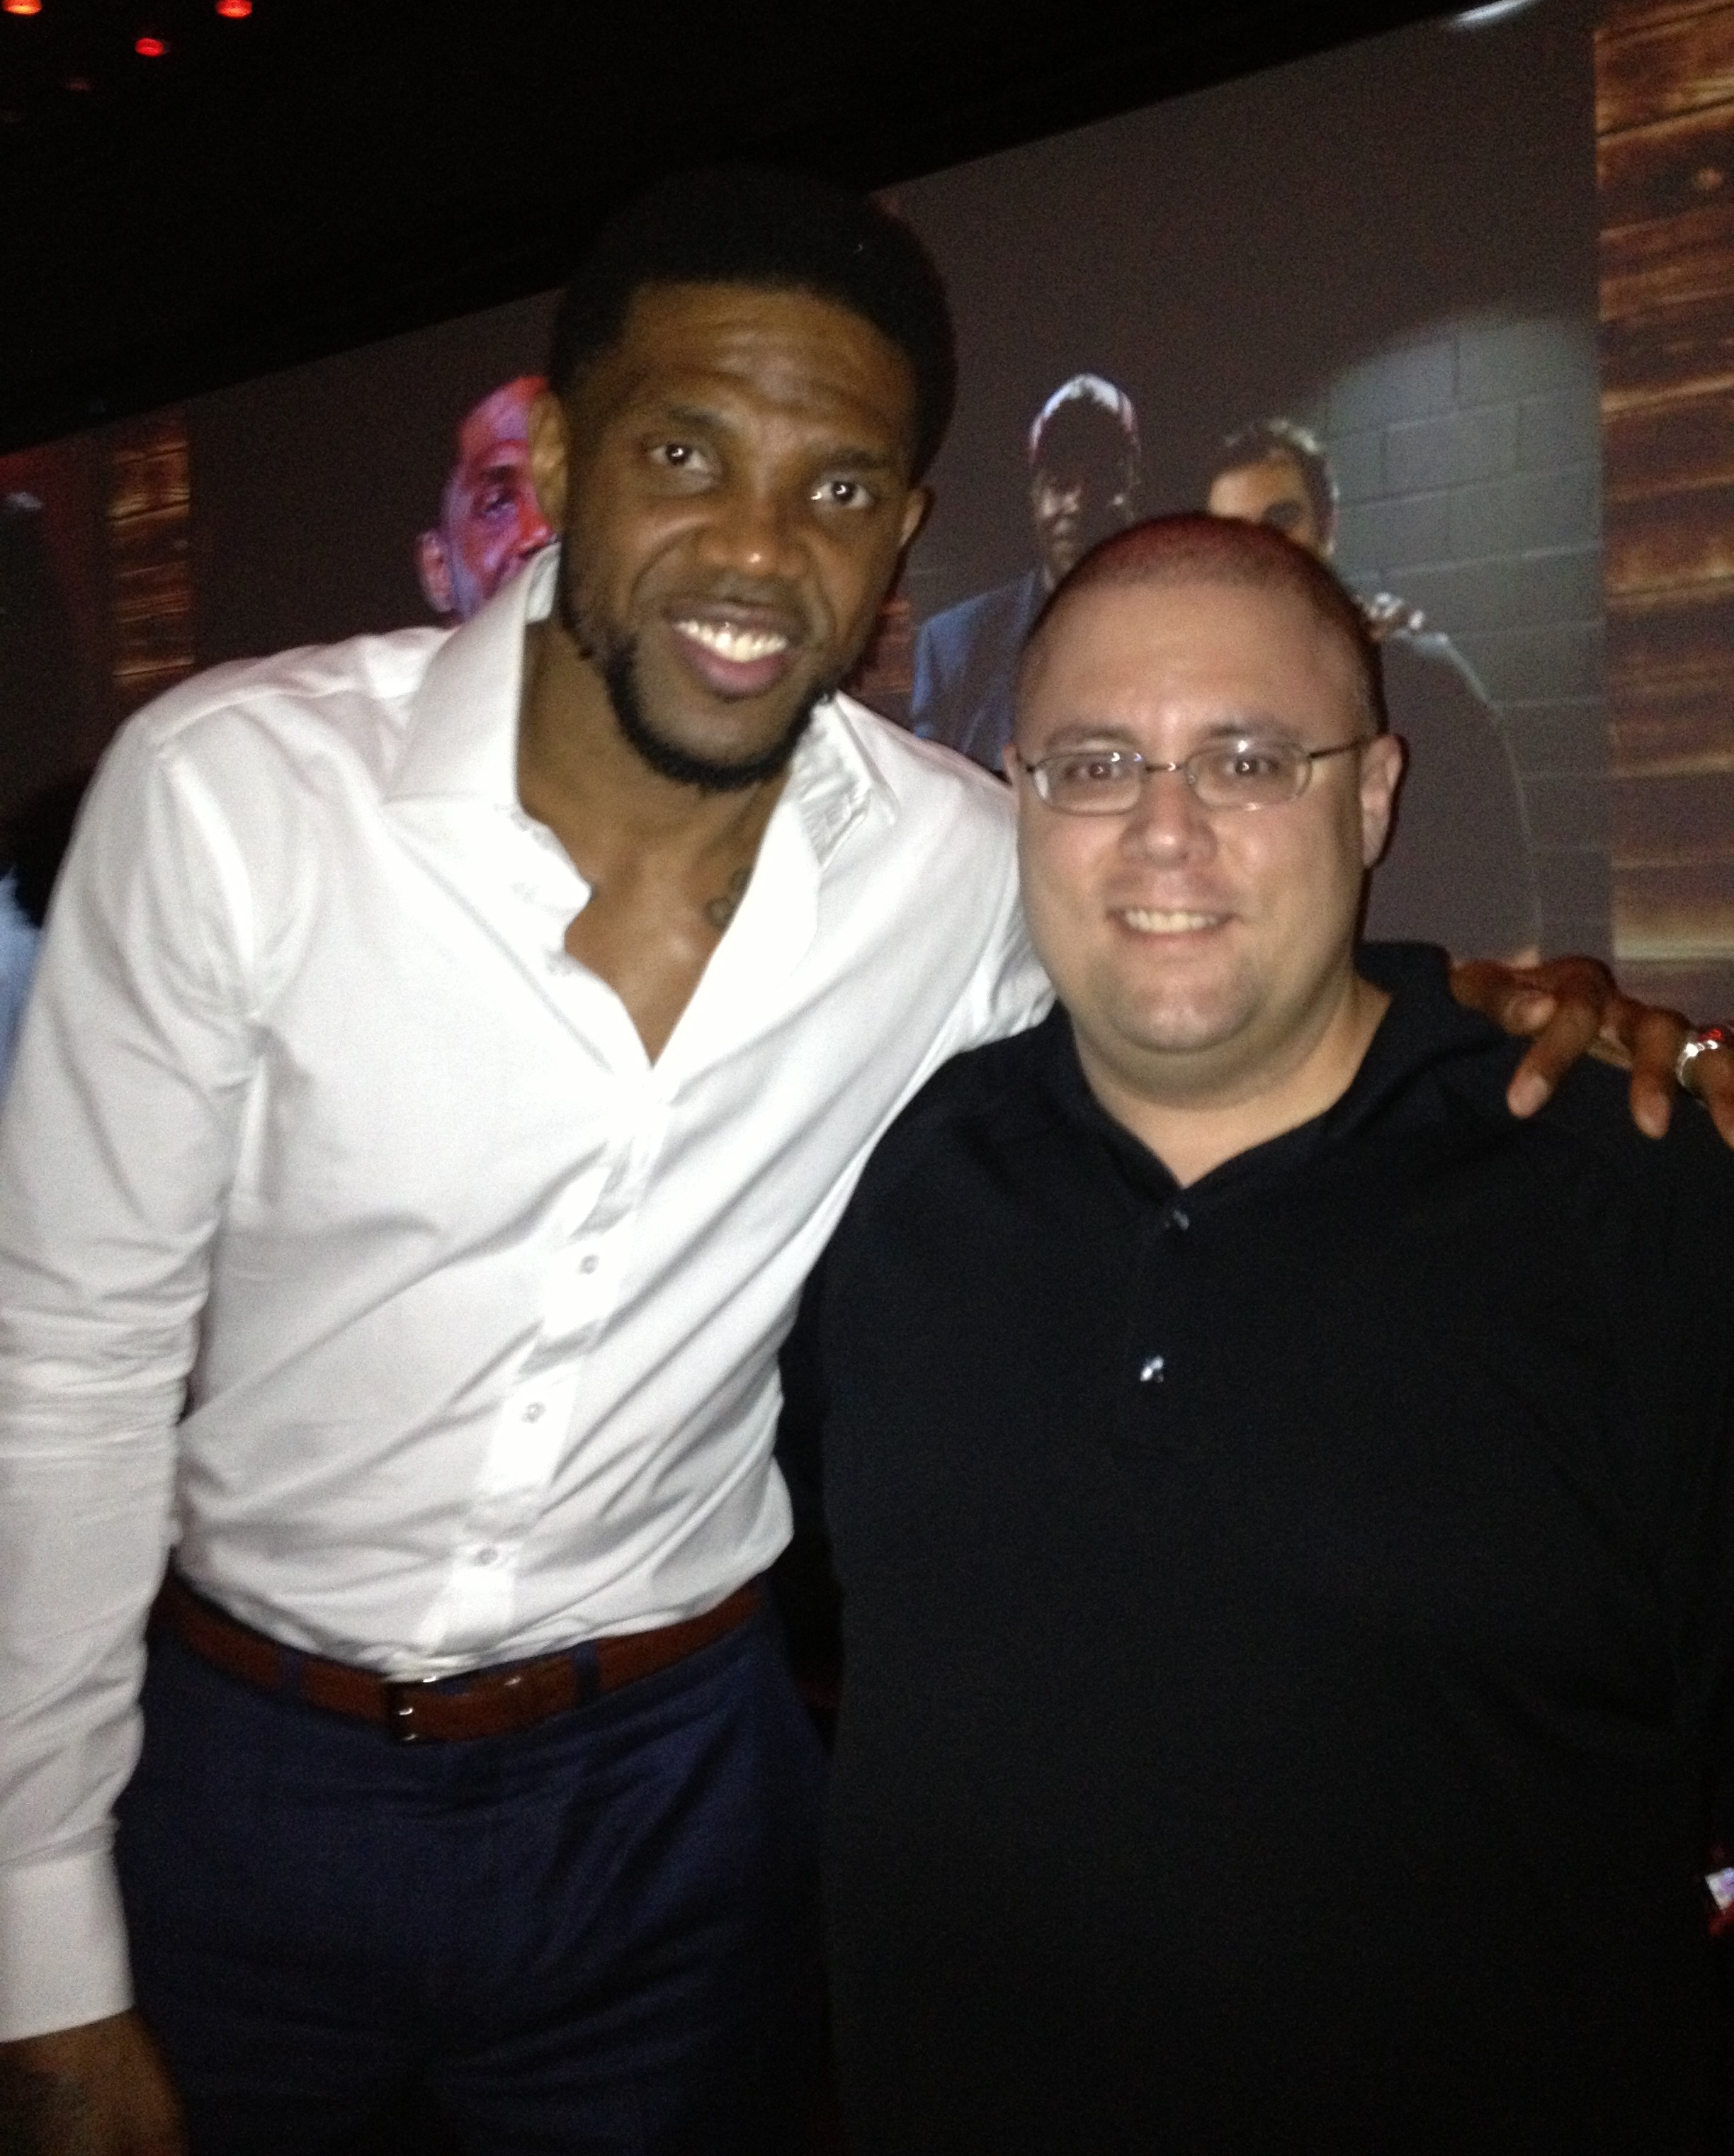 Alexander Garcia & Udonis Haslem of the Miami Heat after the premier of 